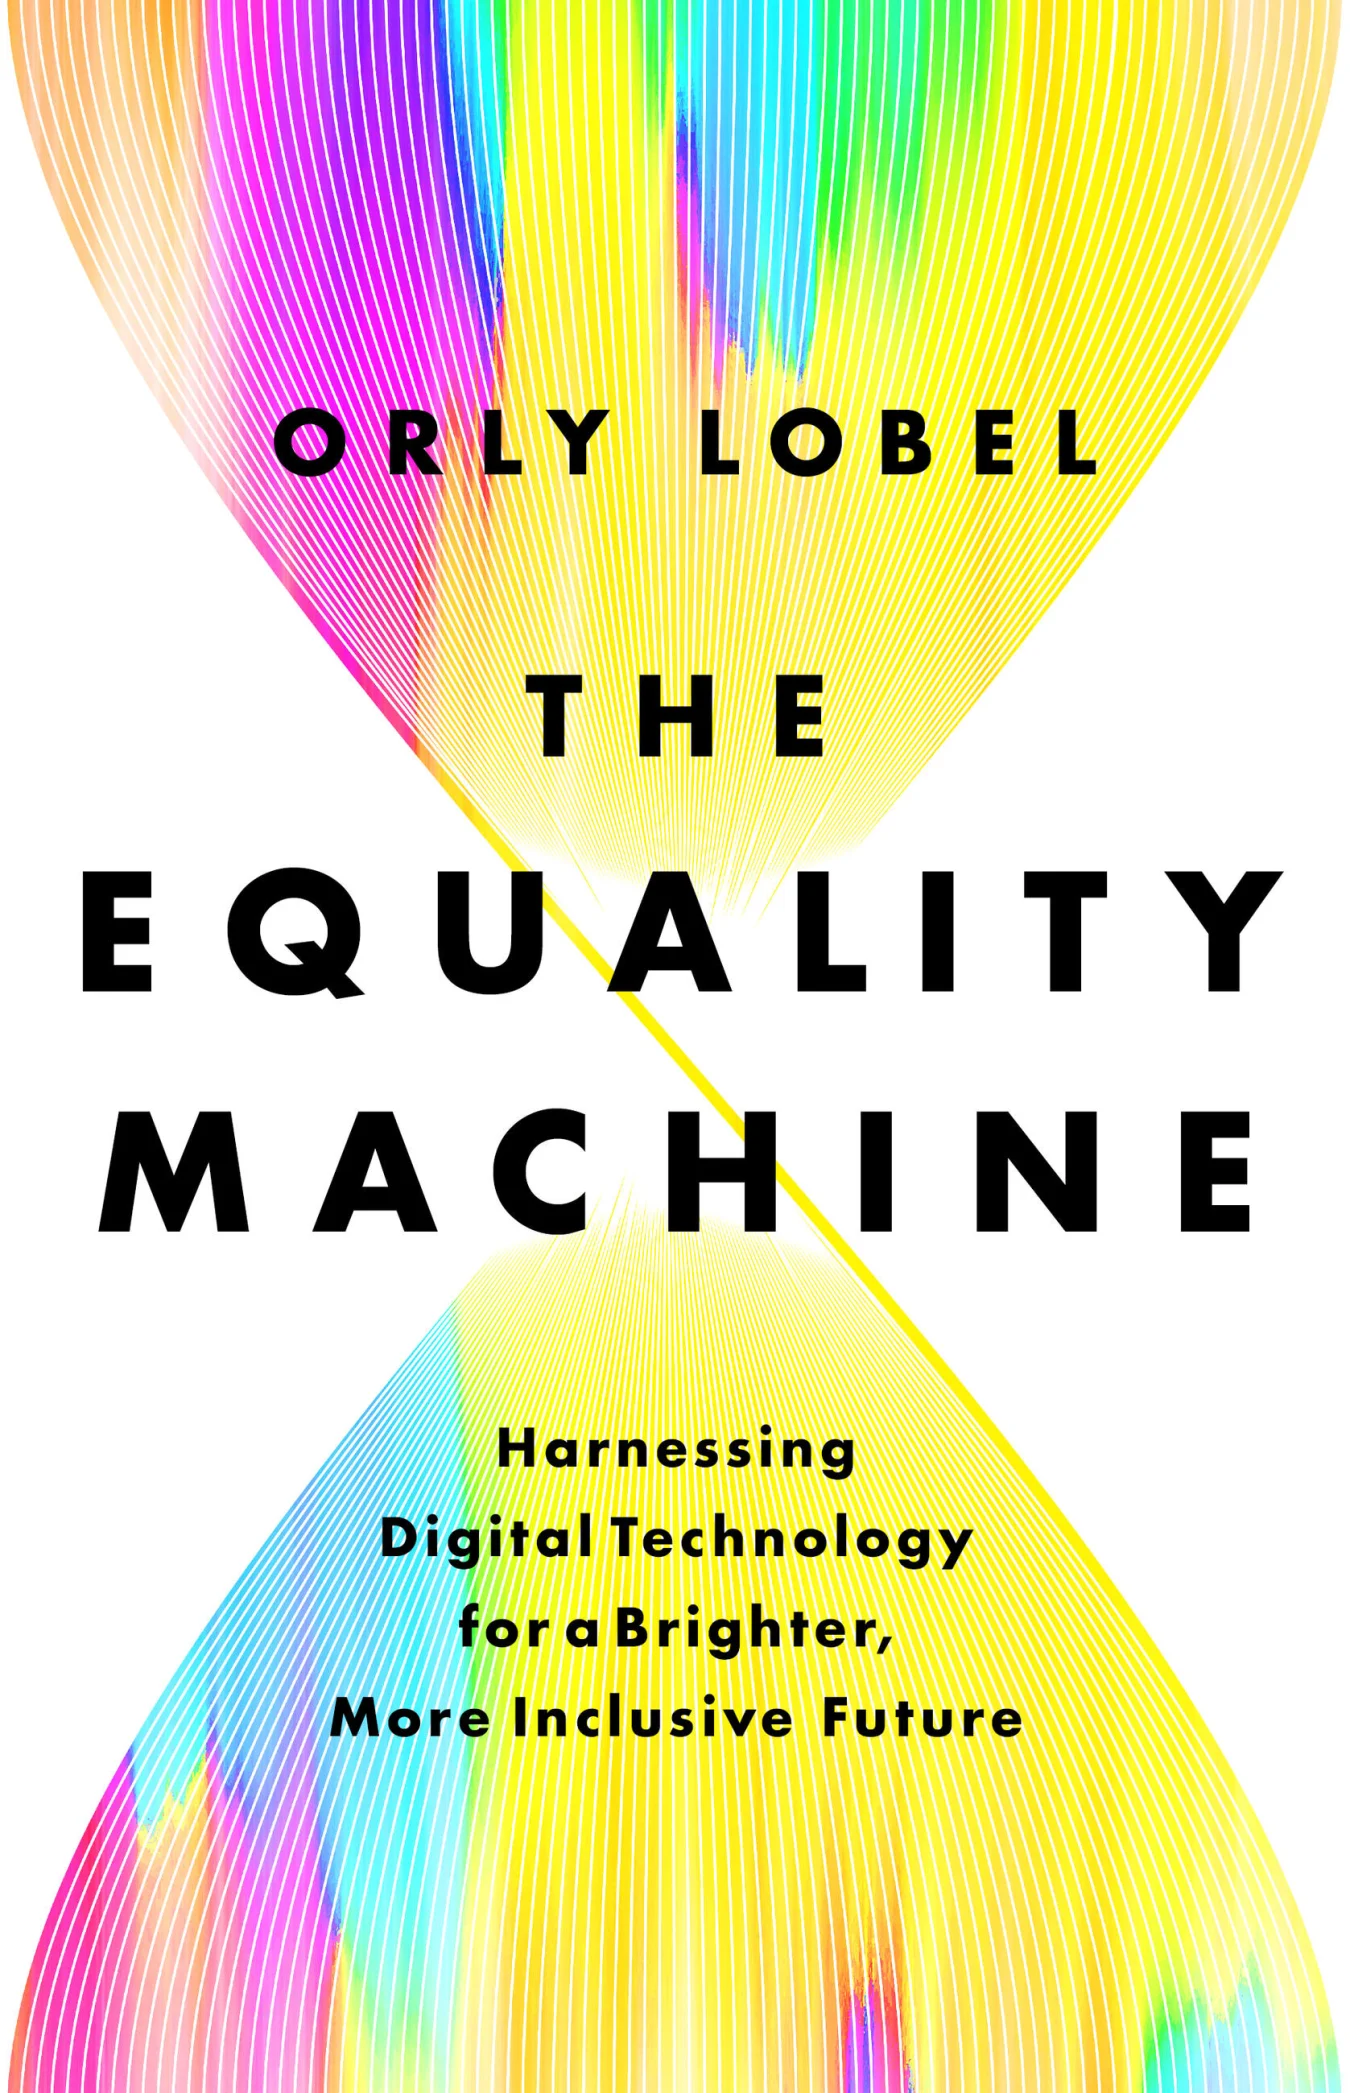 The Cover of the Equality Machine